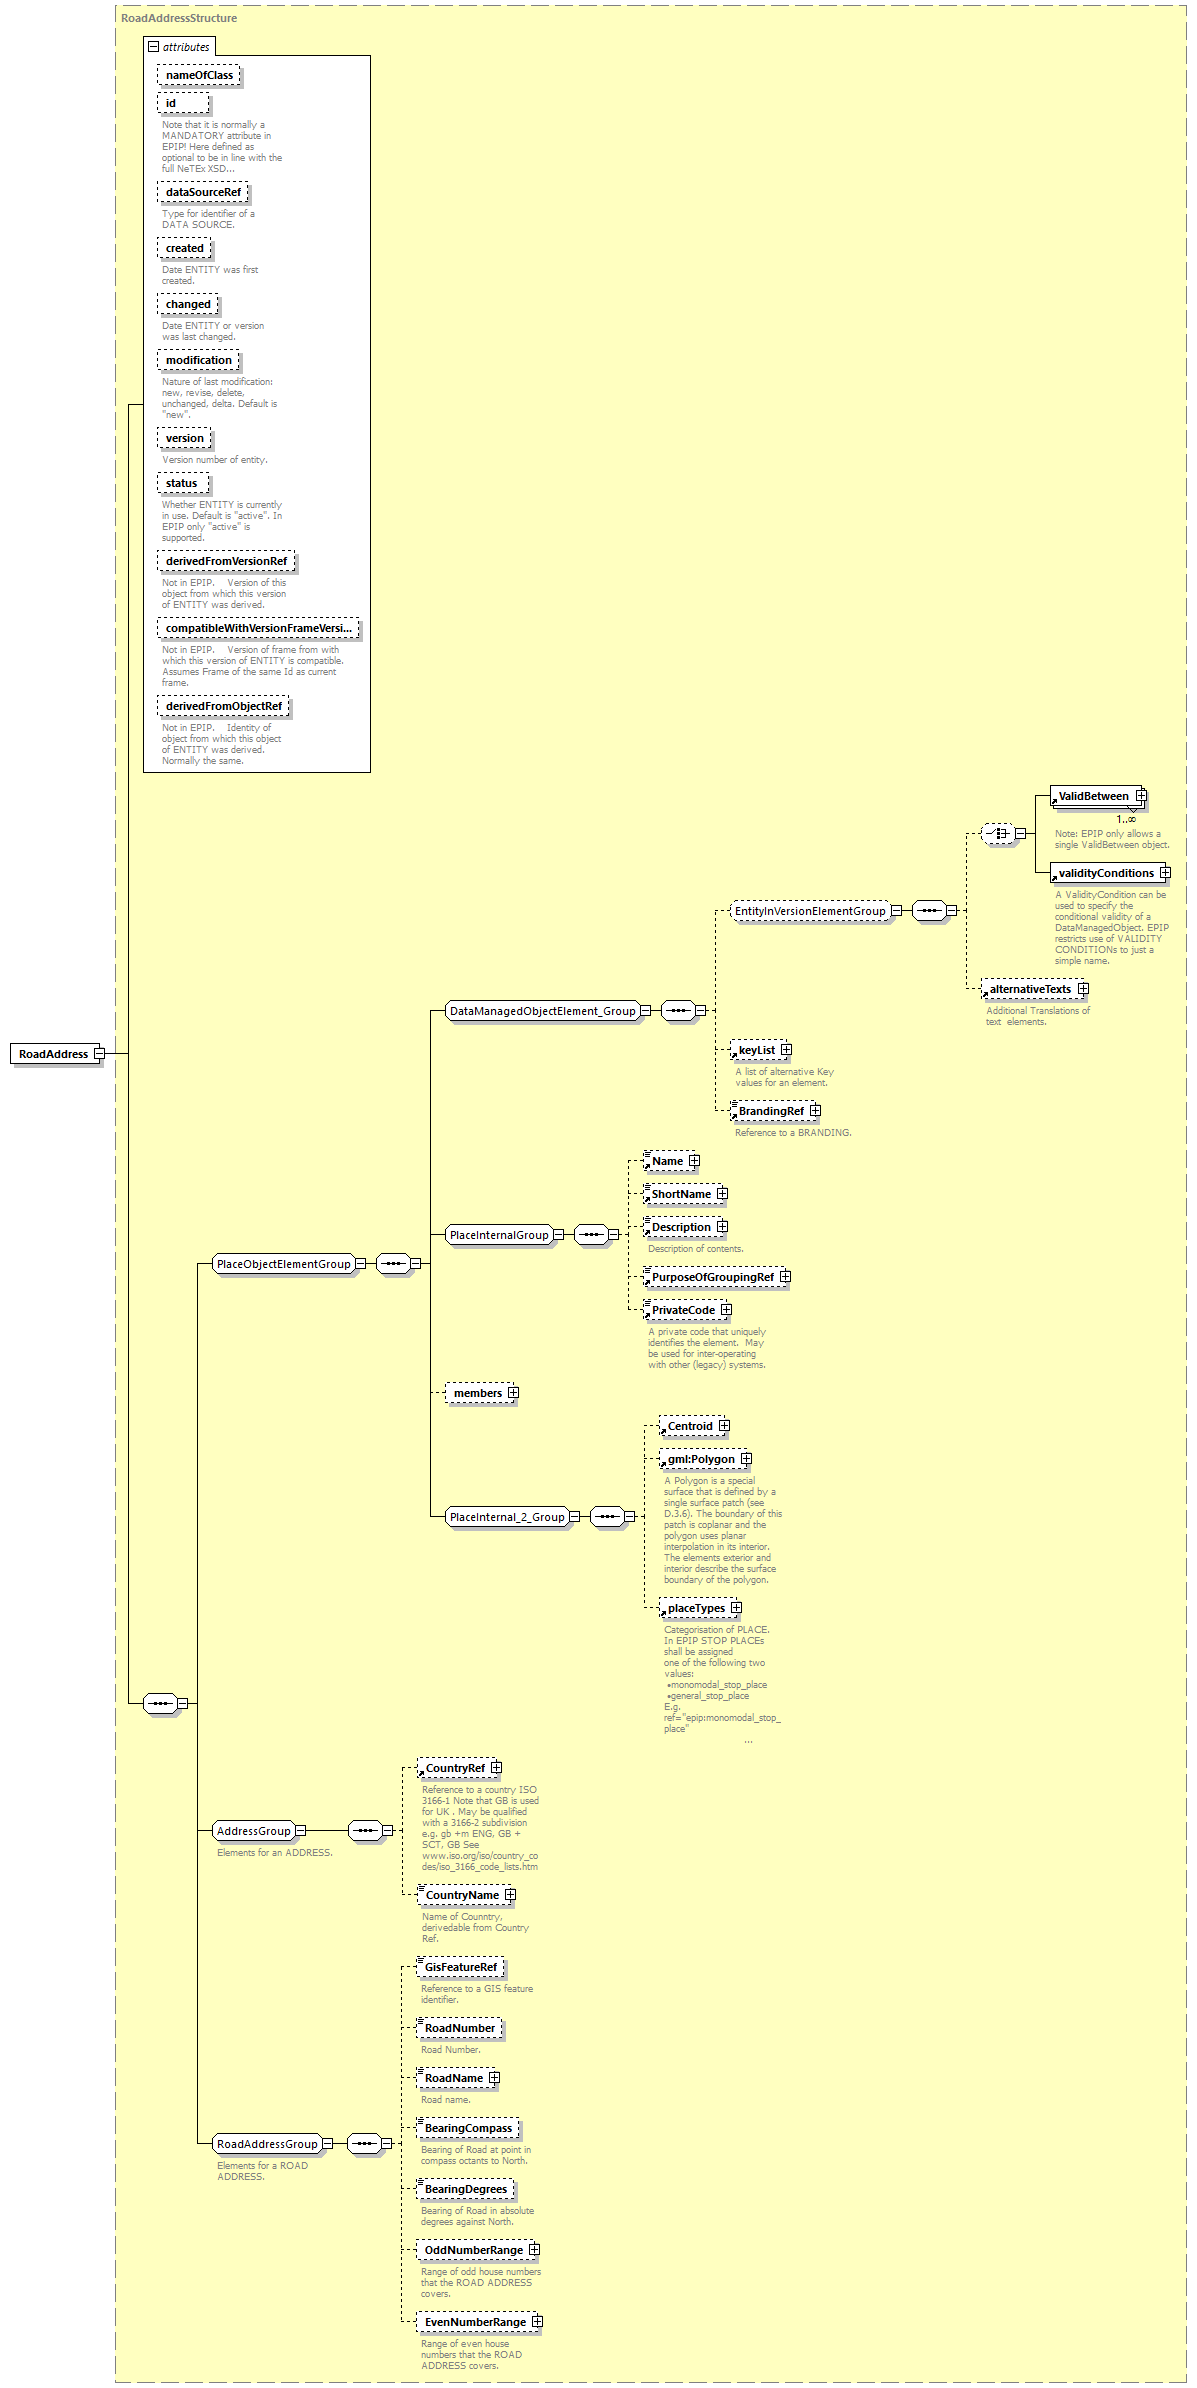 reduced_diagrams/reduced_p376.png